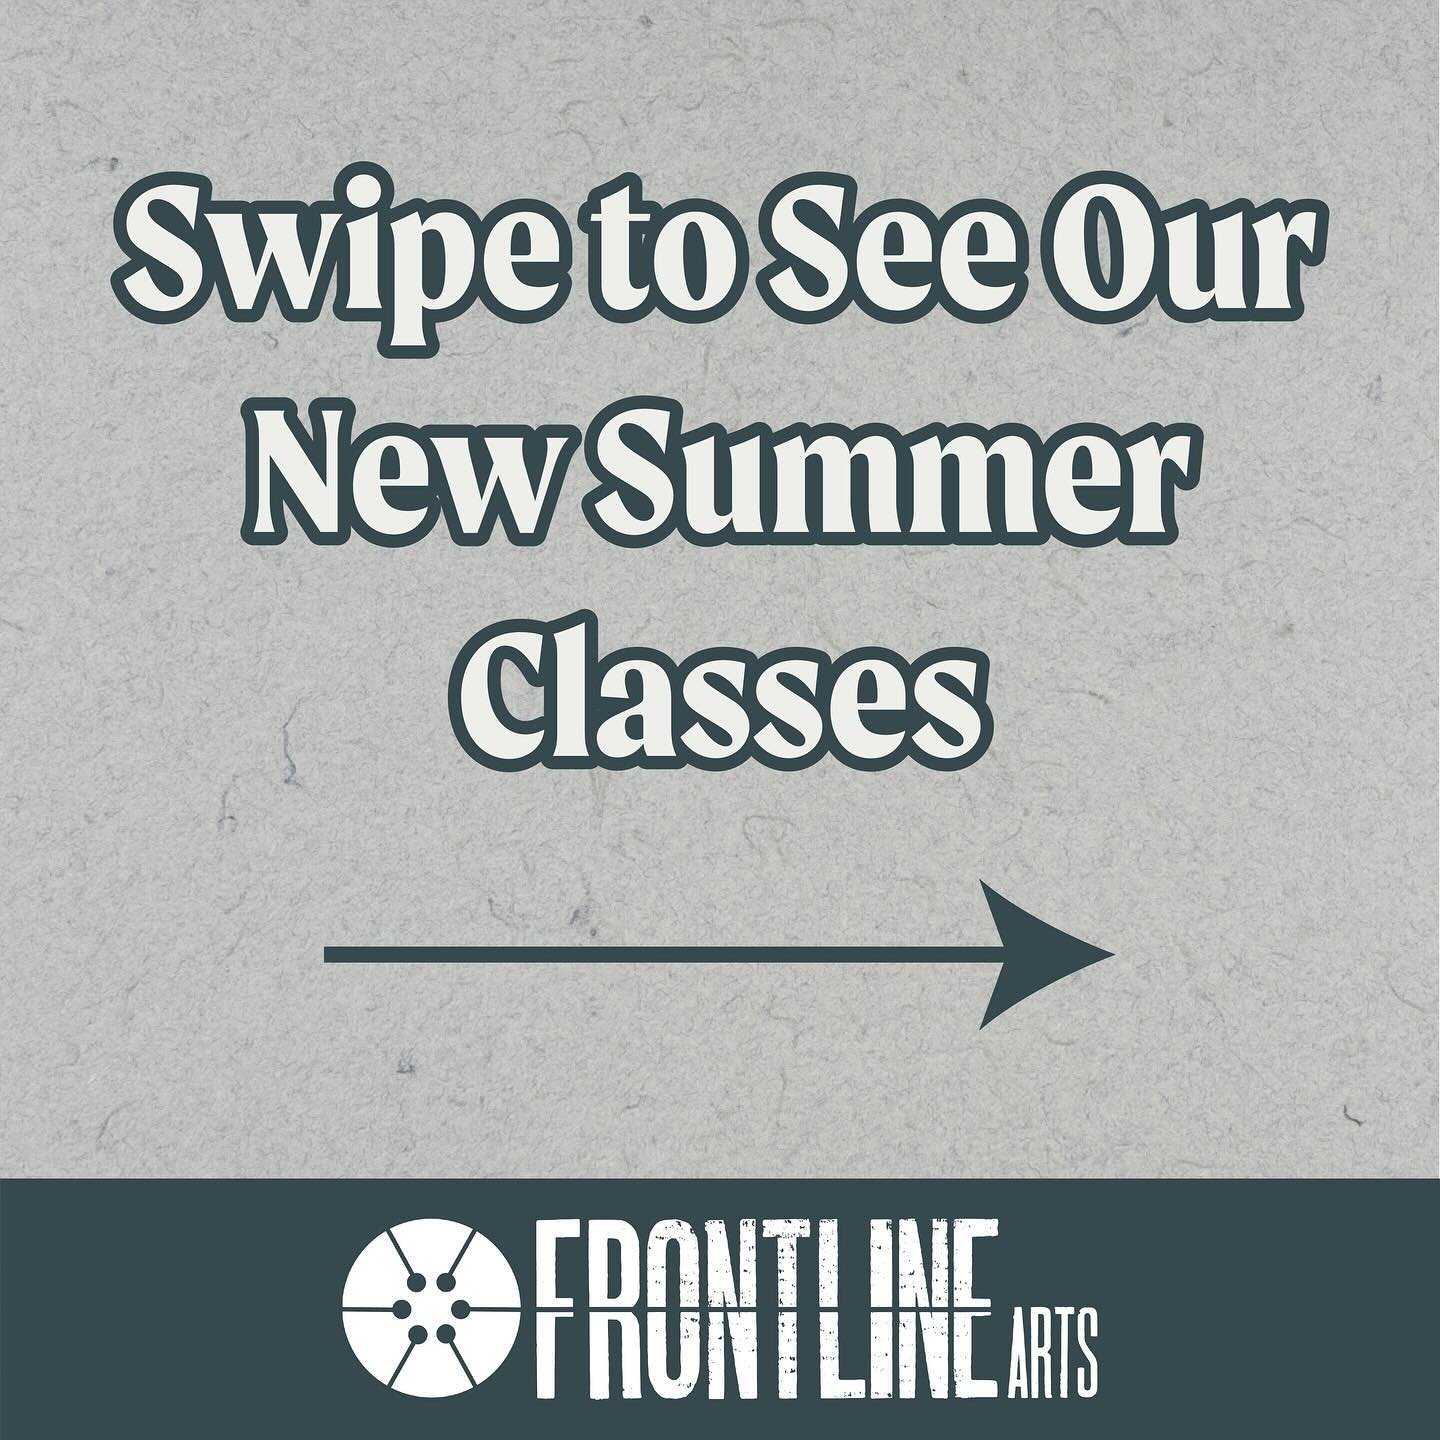 Swipe to see all our new upcoming summer classes! More information for each class available at our link in bio. 

-Letterpress @ Lunch with Dave DiMarchi
Saturday, June 1st, 11am-2pm
Pay What You Wish (Suggested Donation: $15-$30) 

-Hand-Drawn Photo